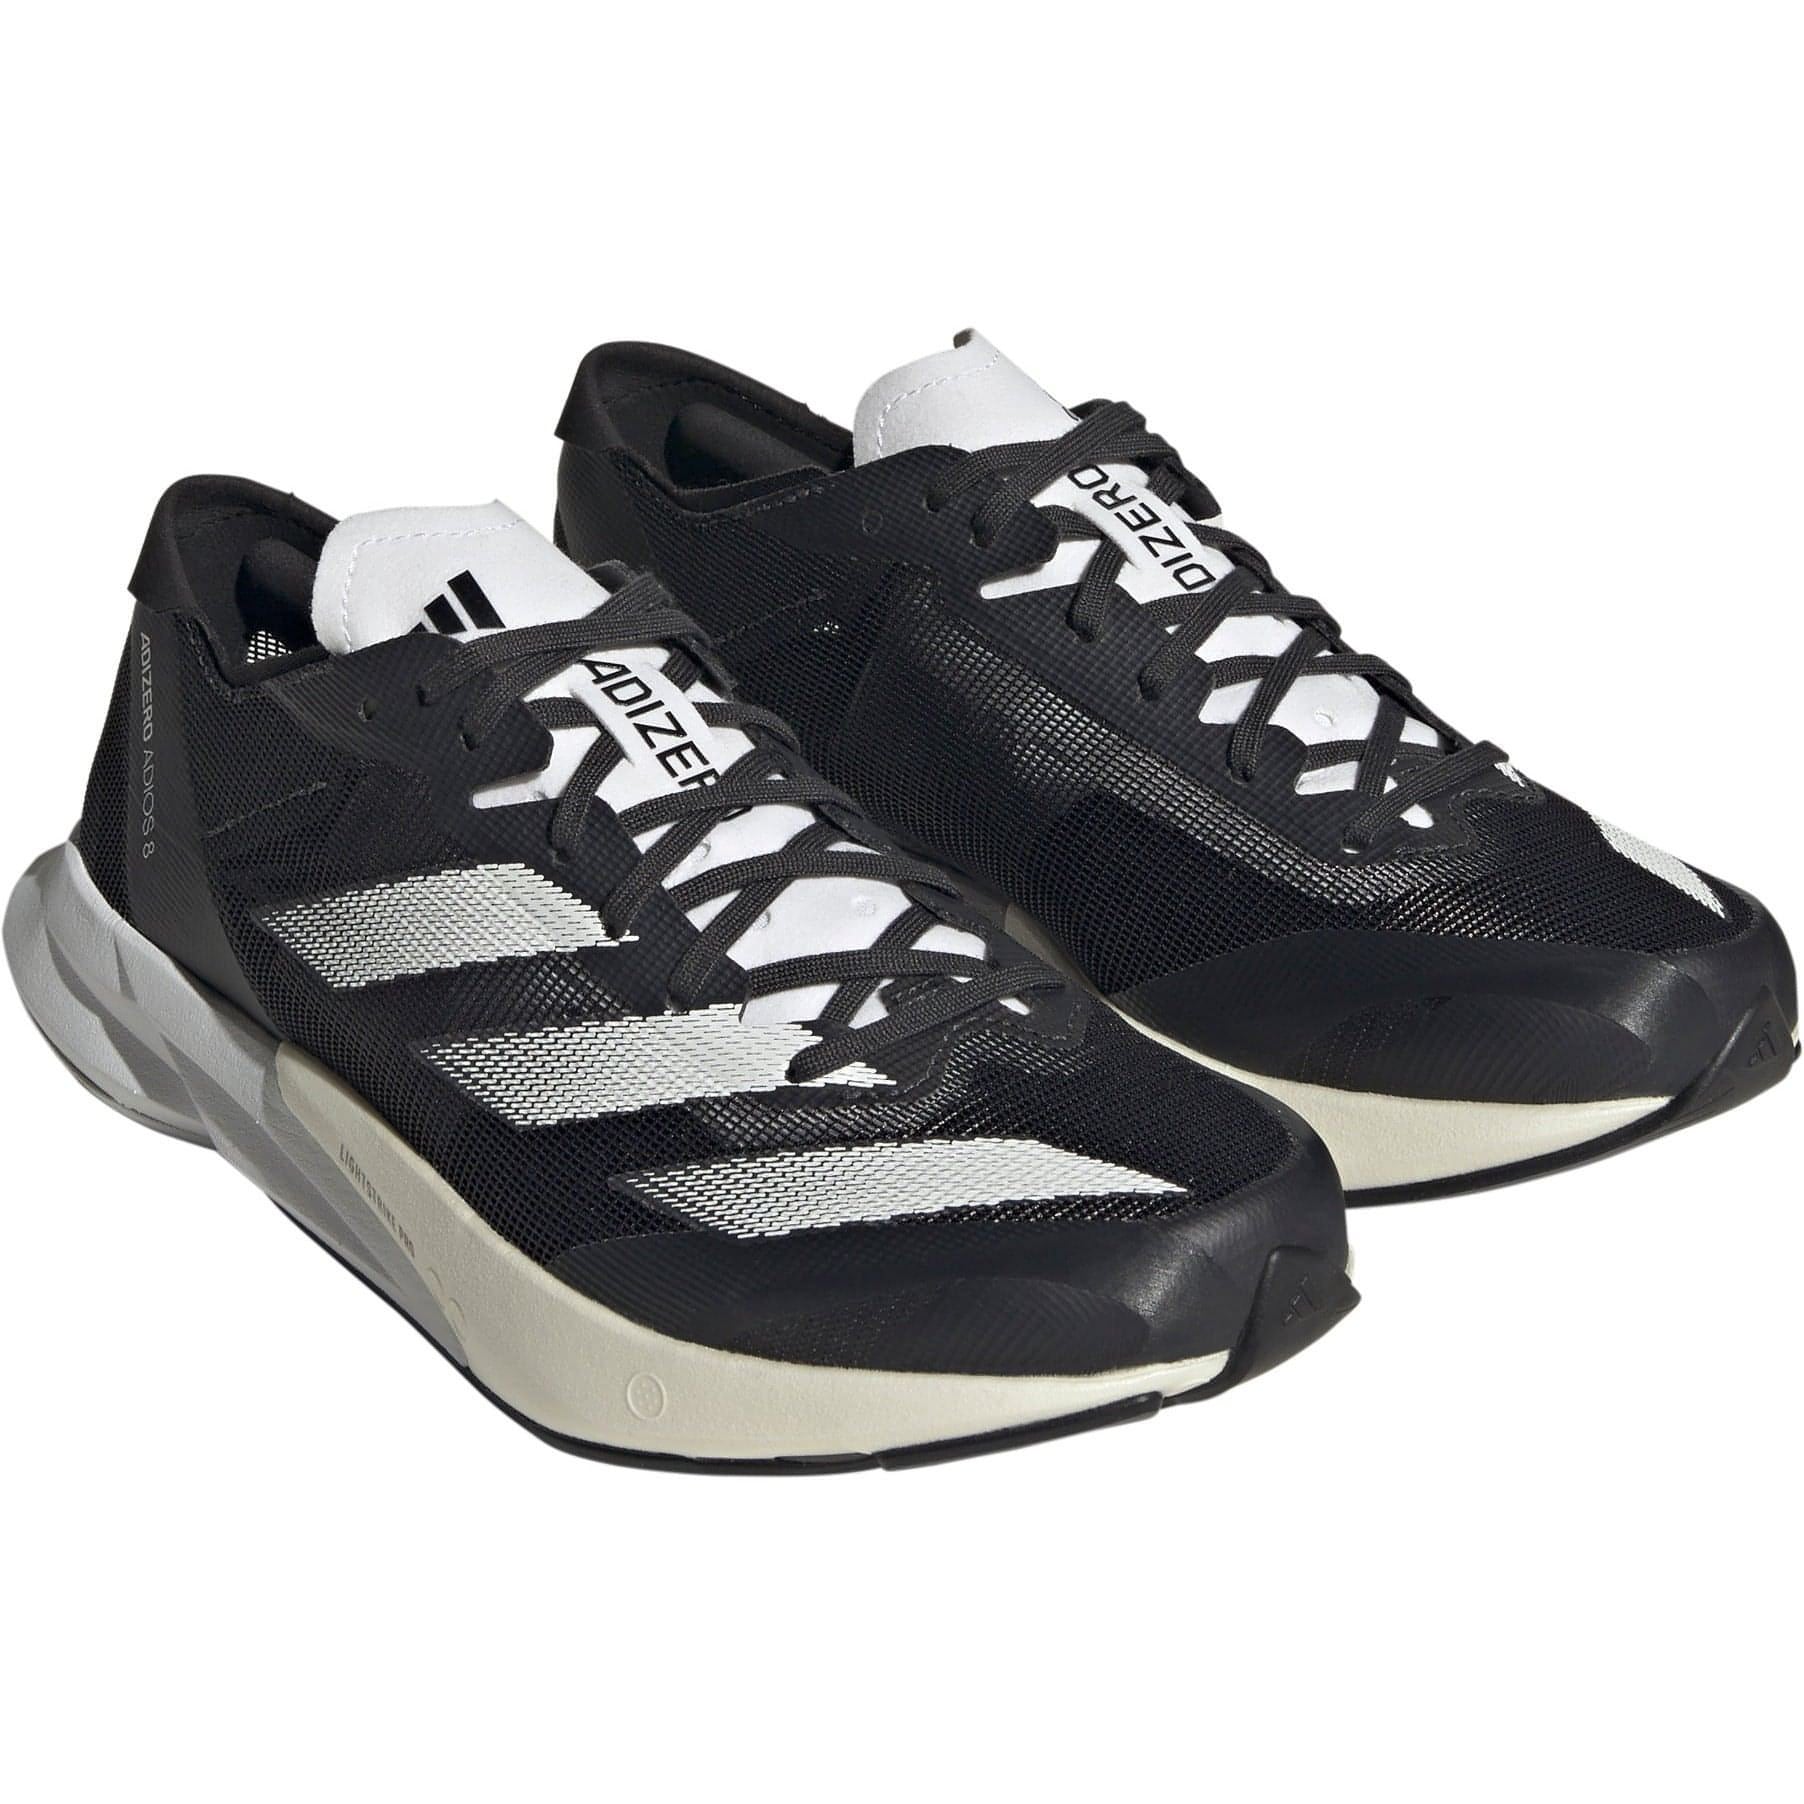 Adidas Adizero Adios Shoes Id6905 Front - Front View